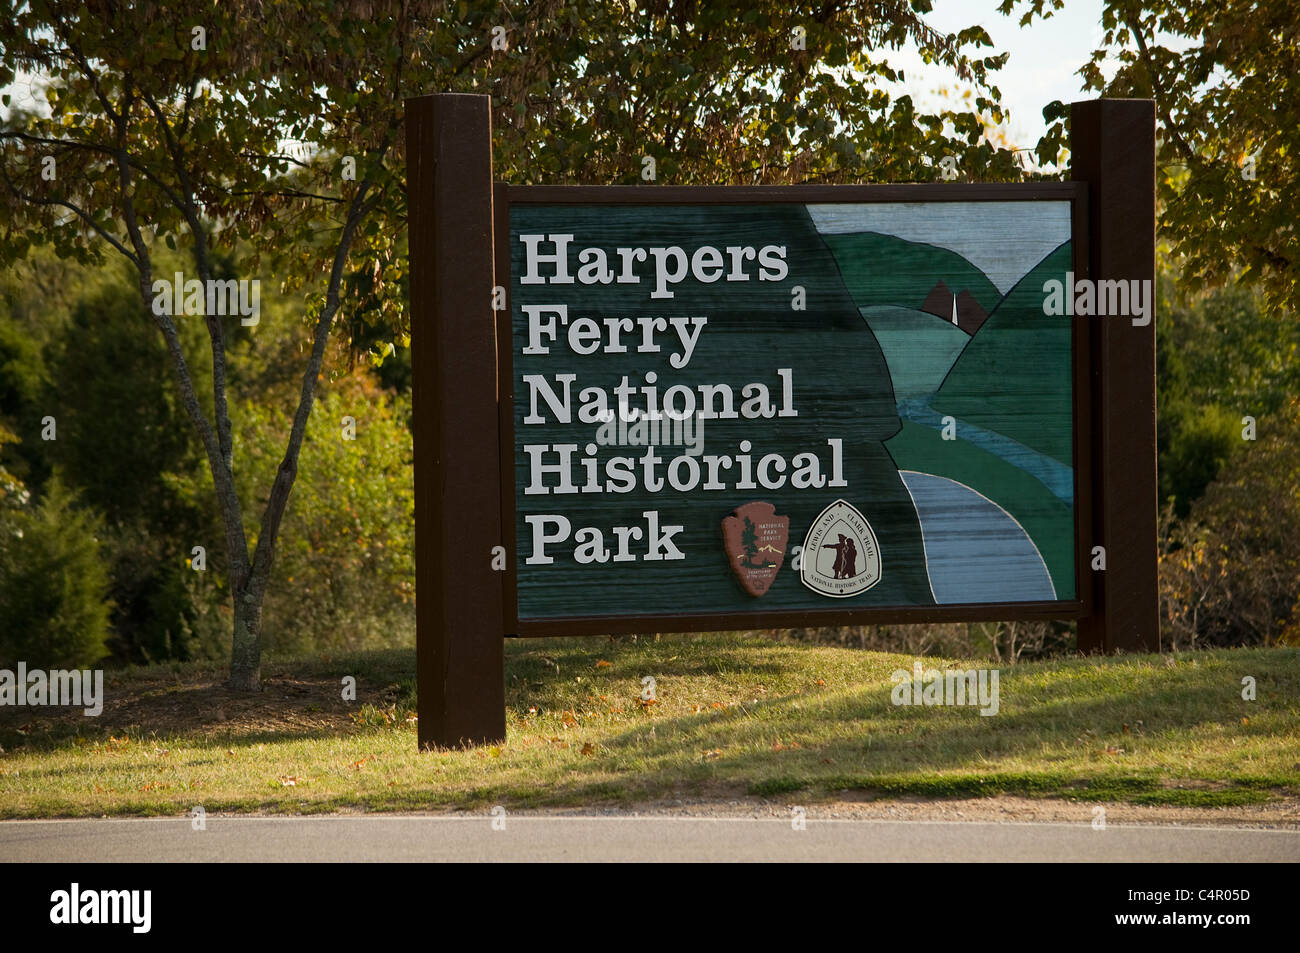 Segno per harpers Ferry National Historical Park in harpers Ferry, West Virginia Foto Stock